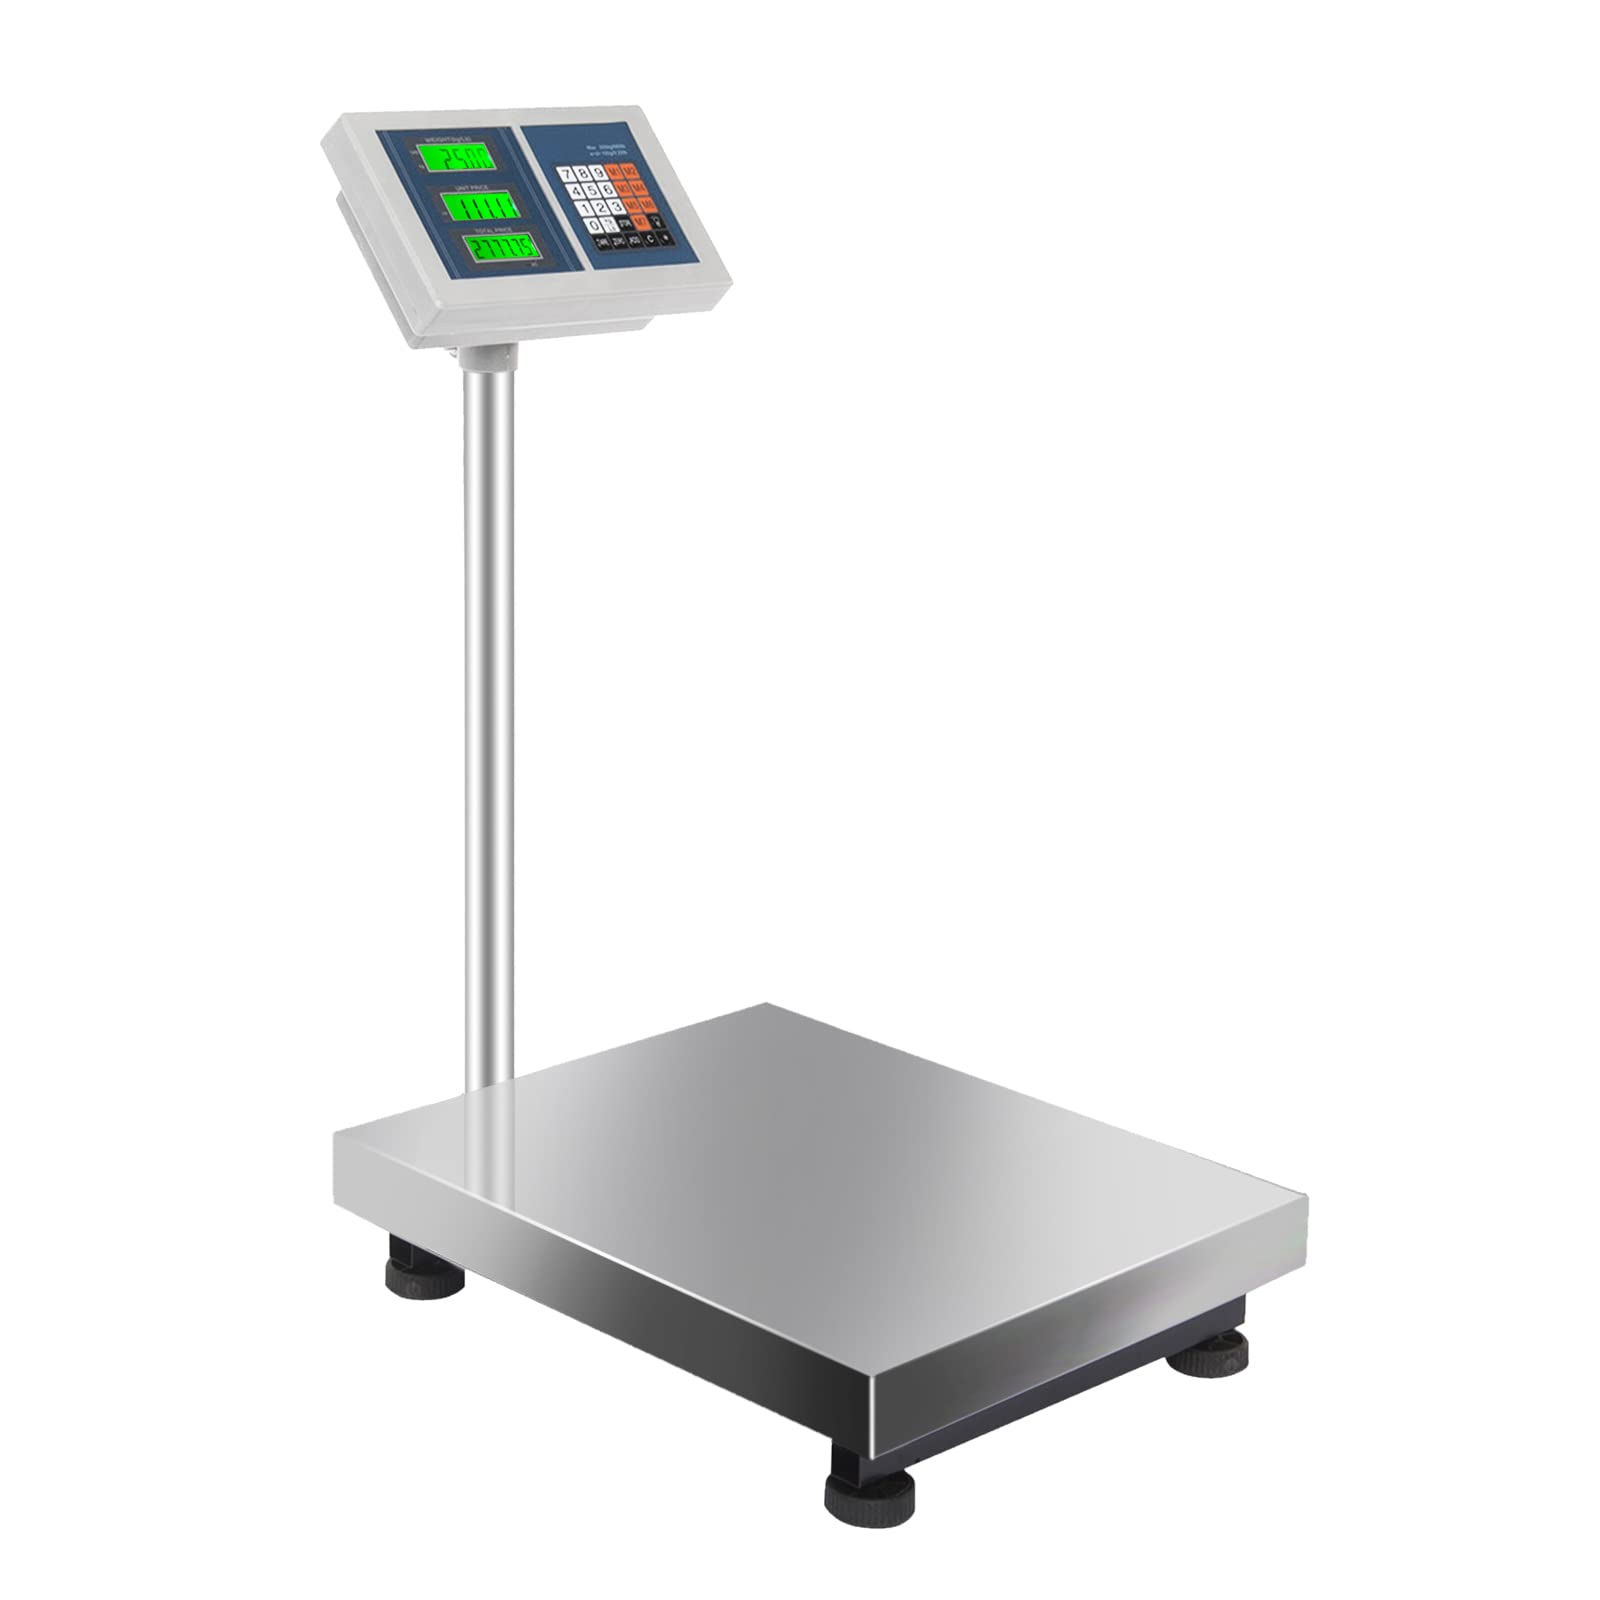 66 lb (30 kg) Digital Postal Scale, Piece Counting, Price Calculation, Dual  Backlit LCD, Wide Stainless Steel Pan, Capacity: Max 30 kg (66 lb), Min